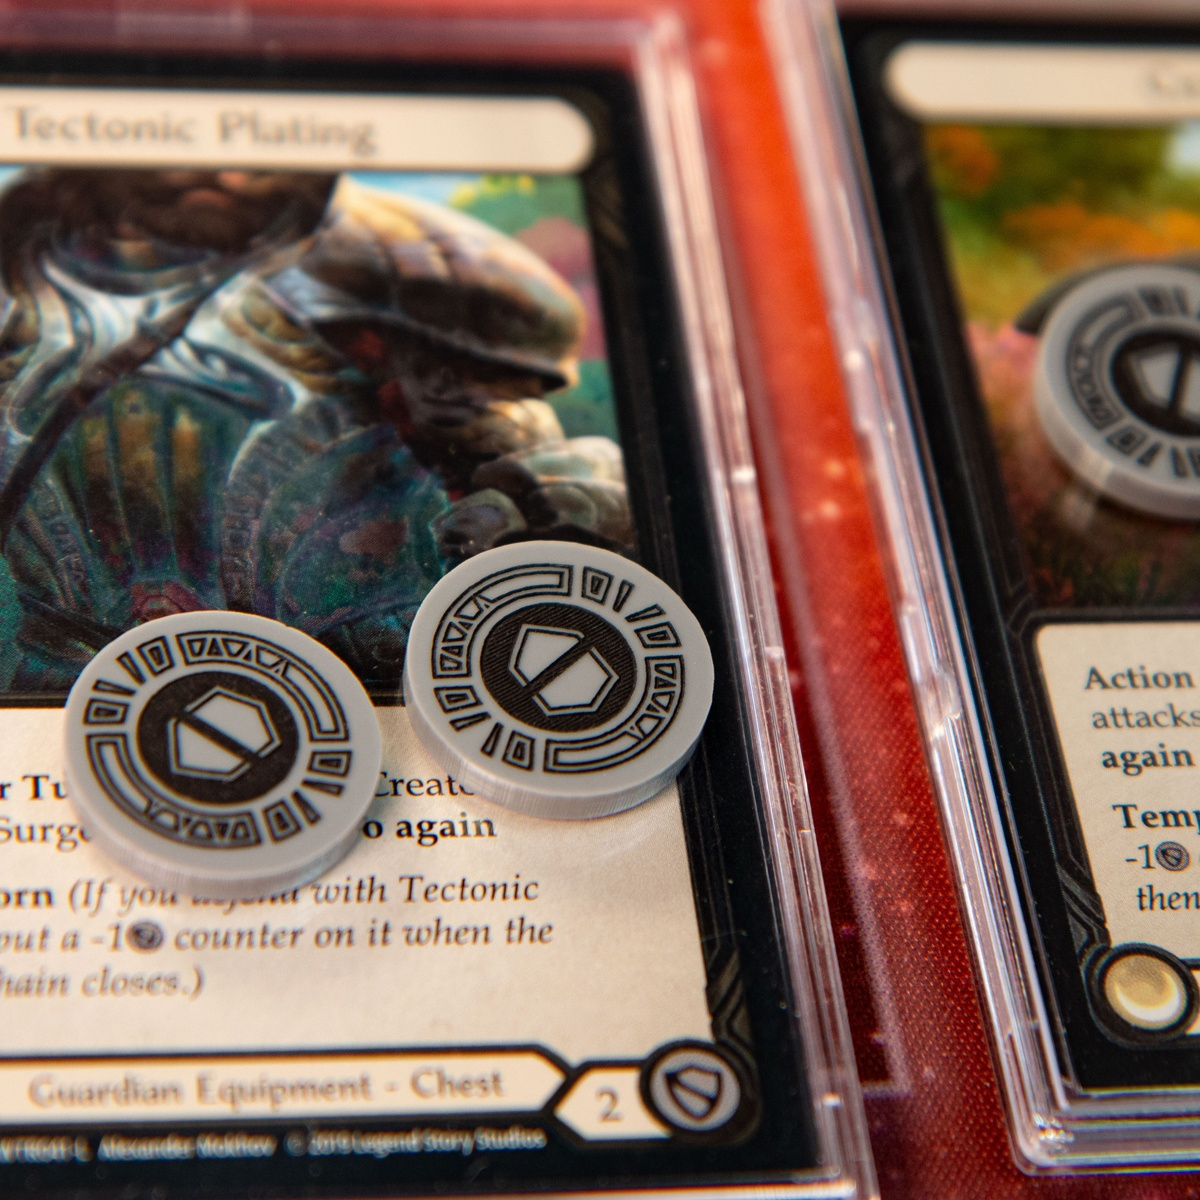 Two Armor Tokens being used to denote the Battleworn status on the Flesh and Blood TCG card, Tectonic Plating